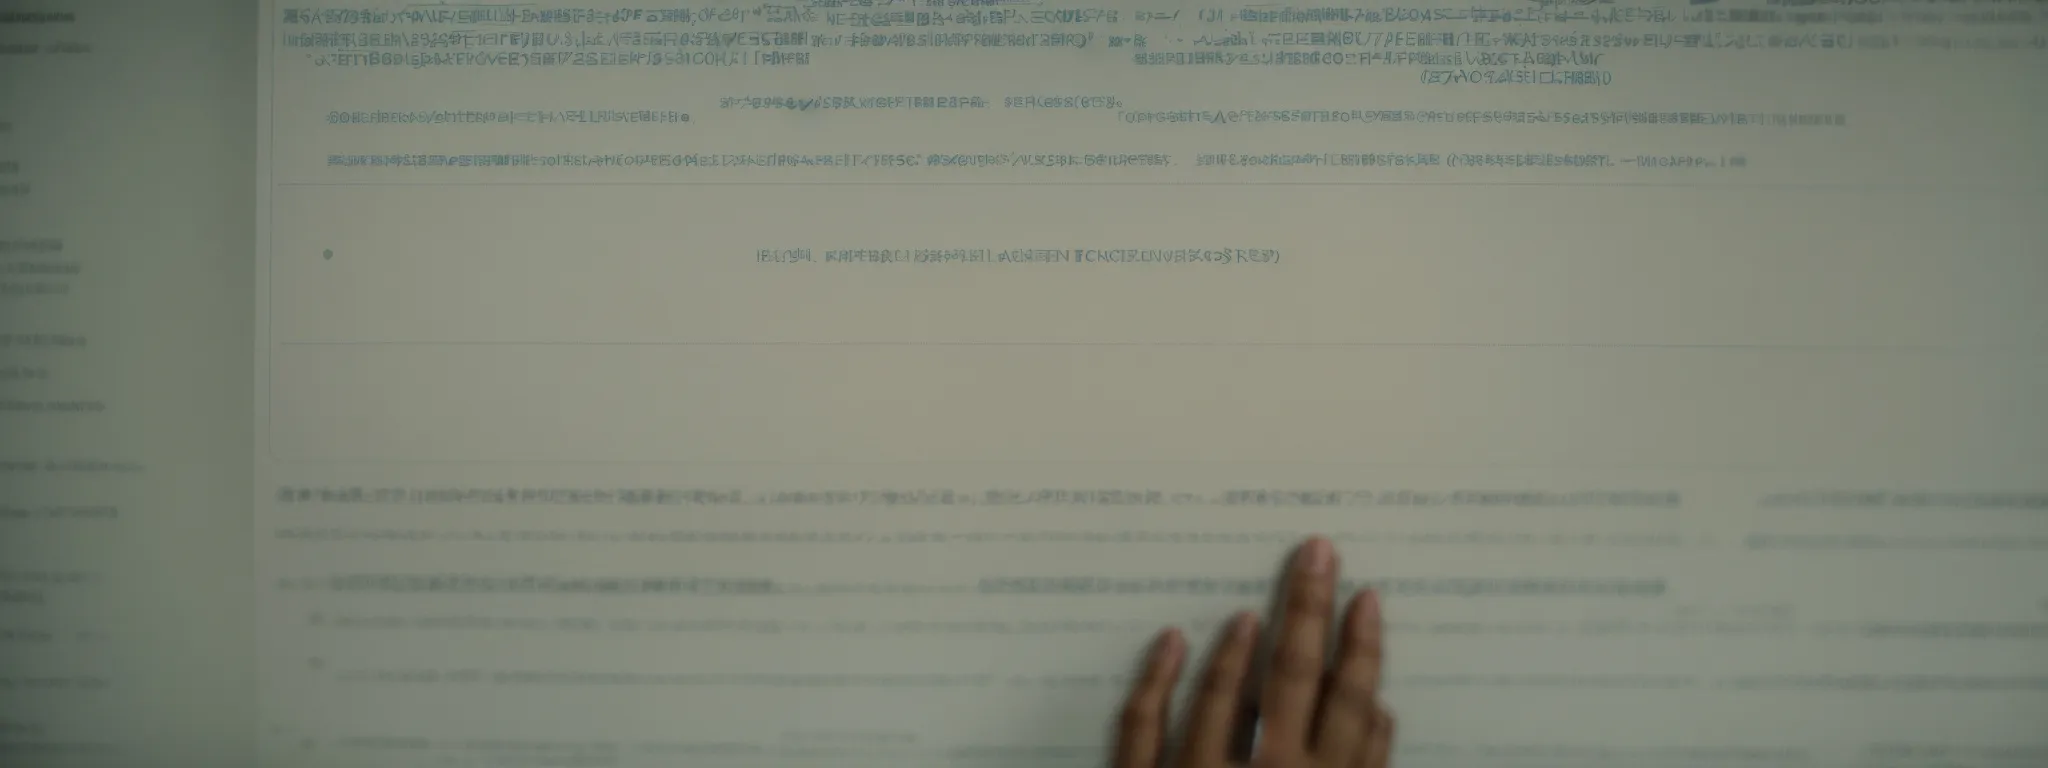 a close-up of a person's hands typing on a laptop with a search engine on the screen, surrounded by notes containing various keywords.